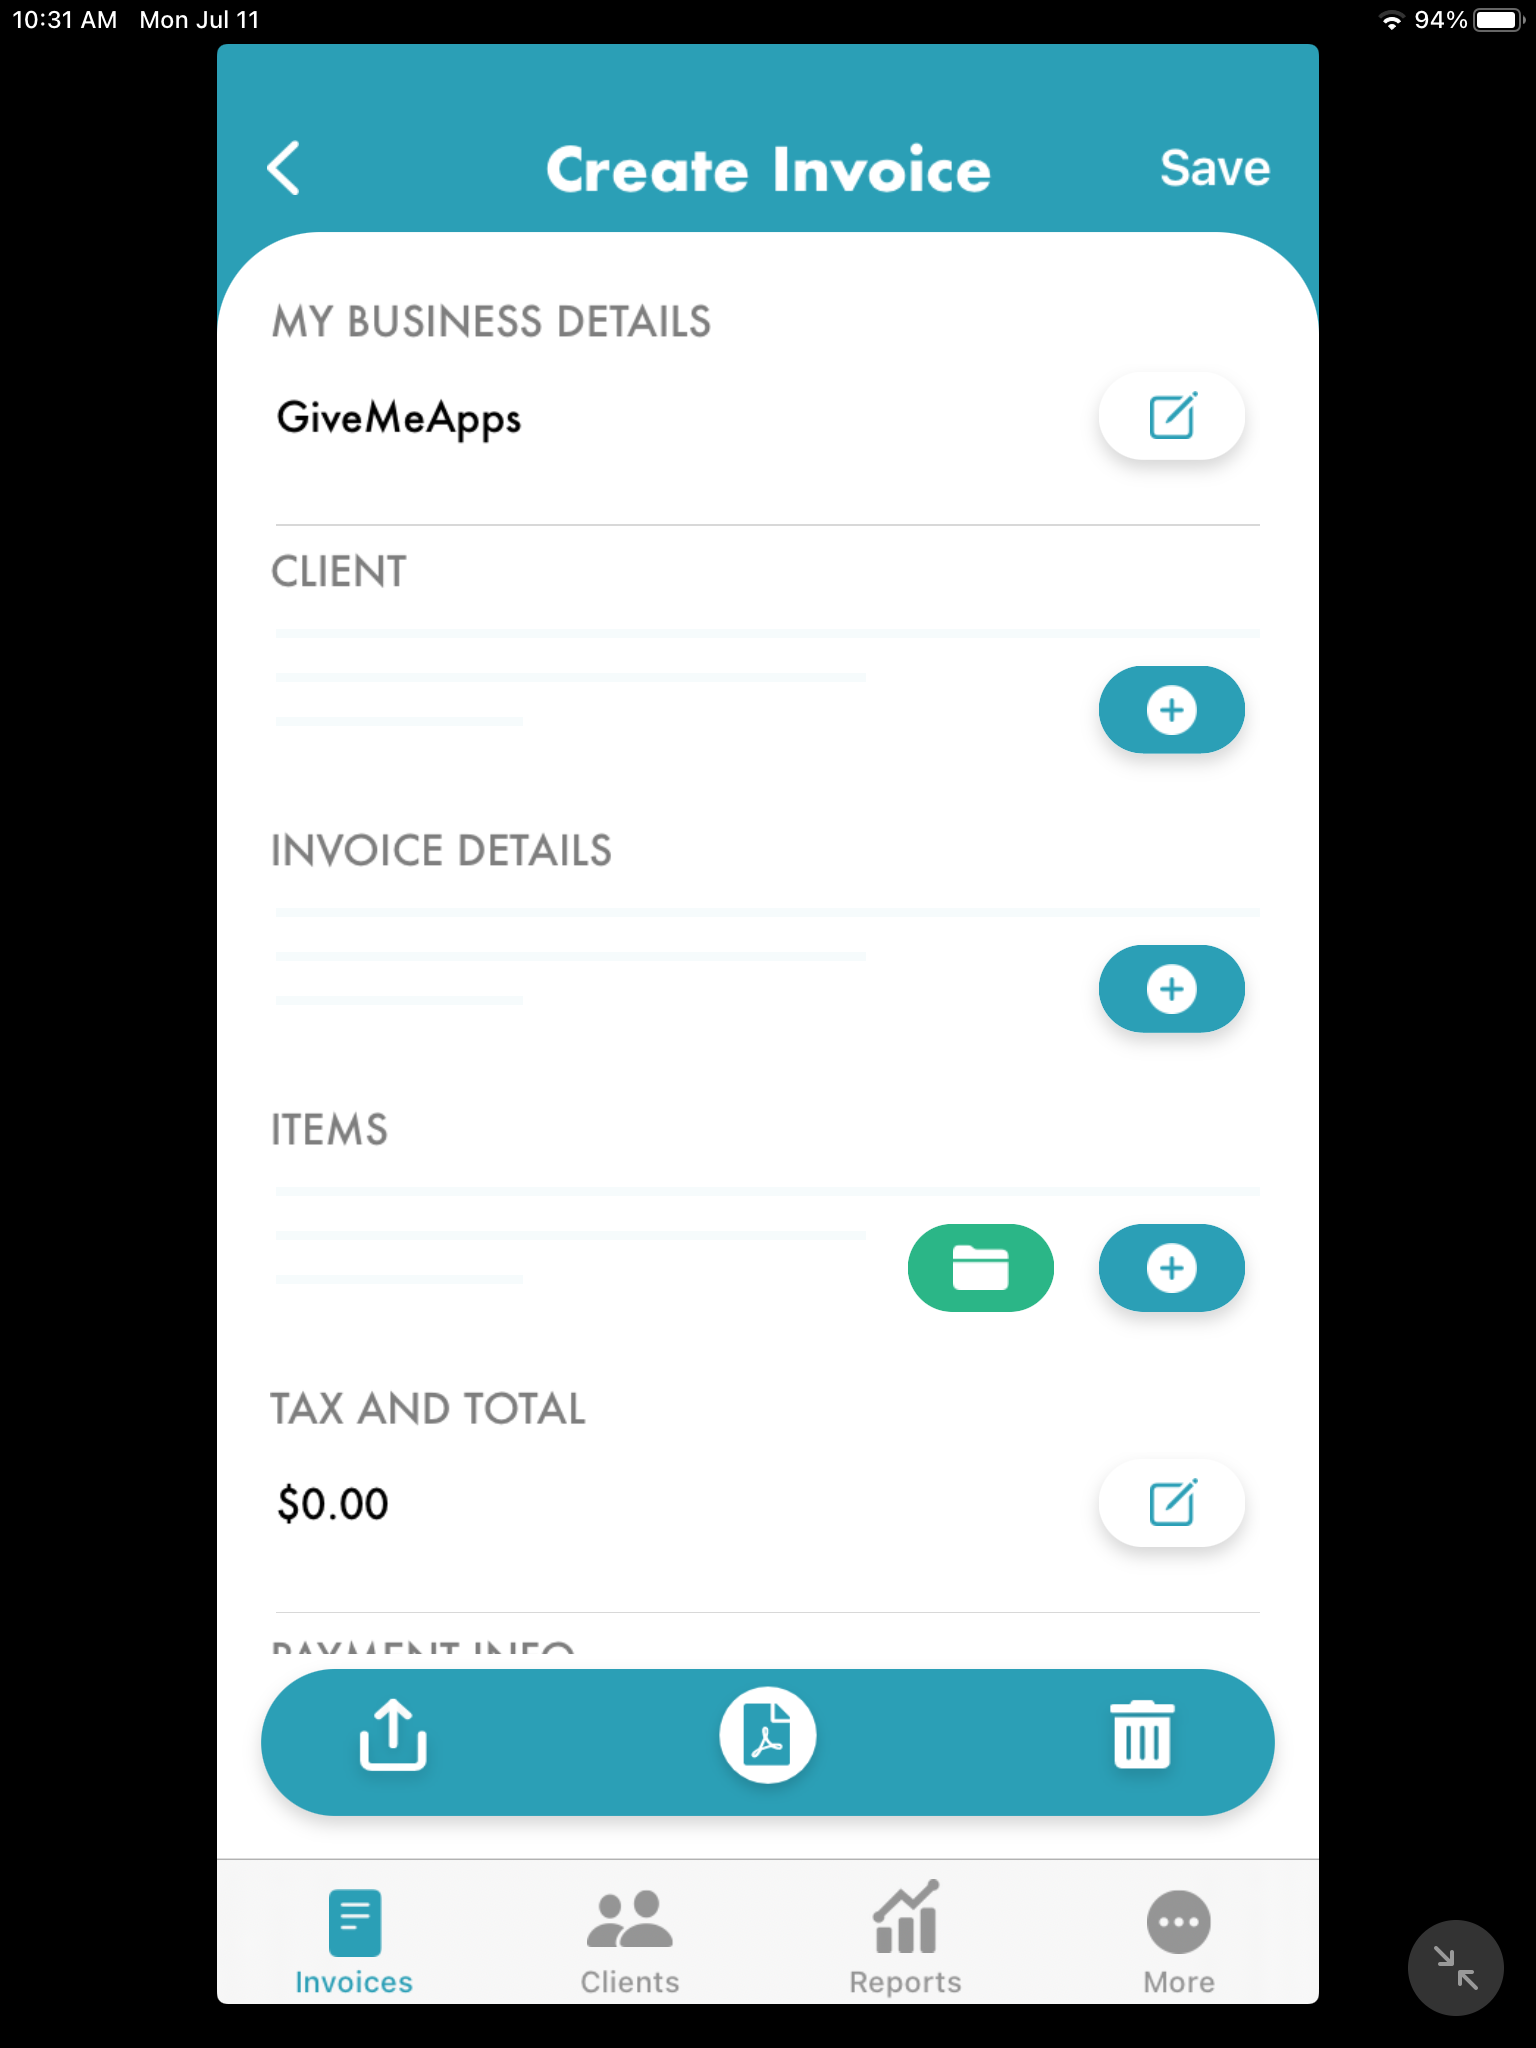 Free Invoice App To PDF | iPhone/iPad App Review | GiveMeApps